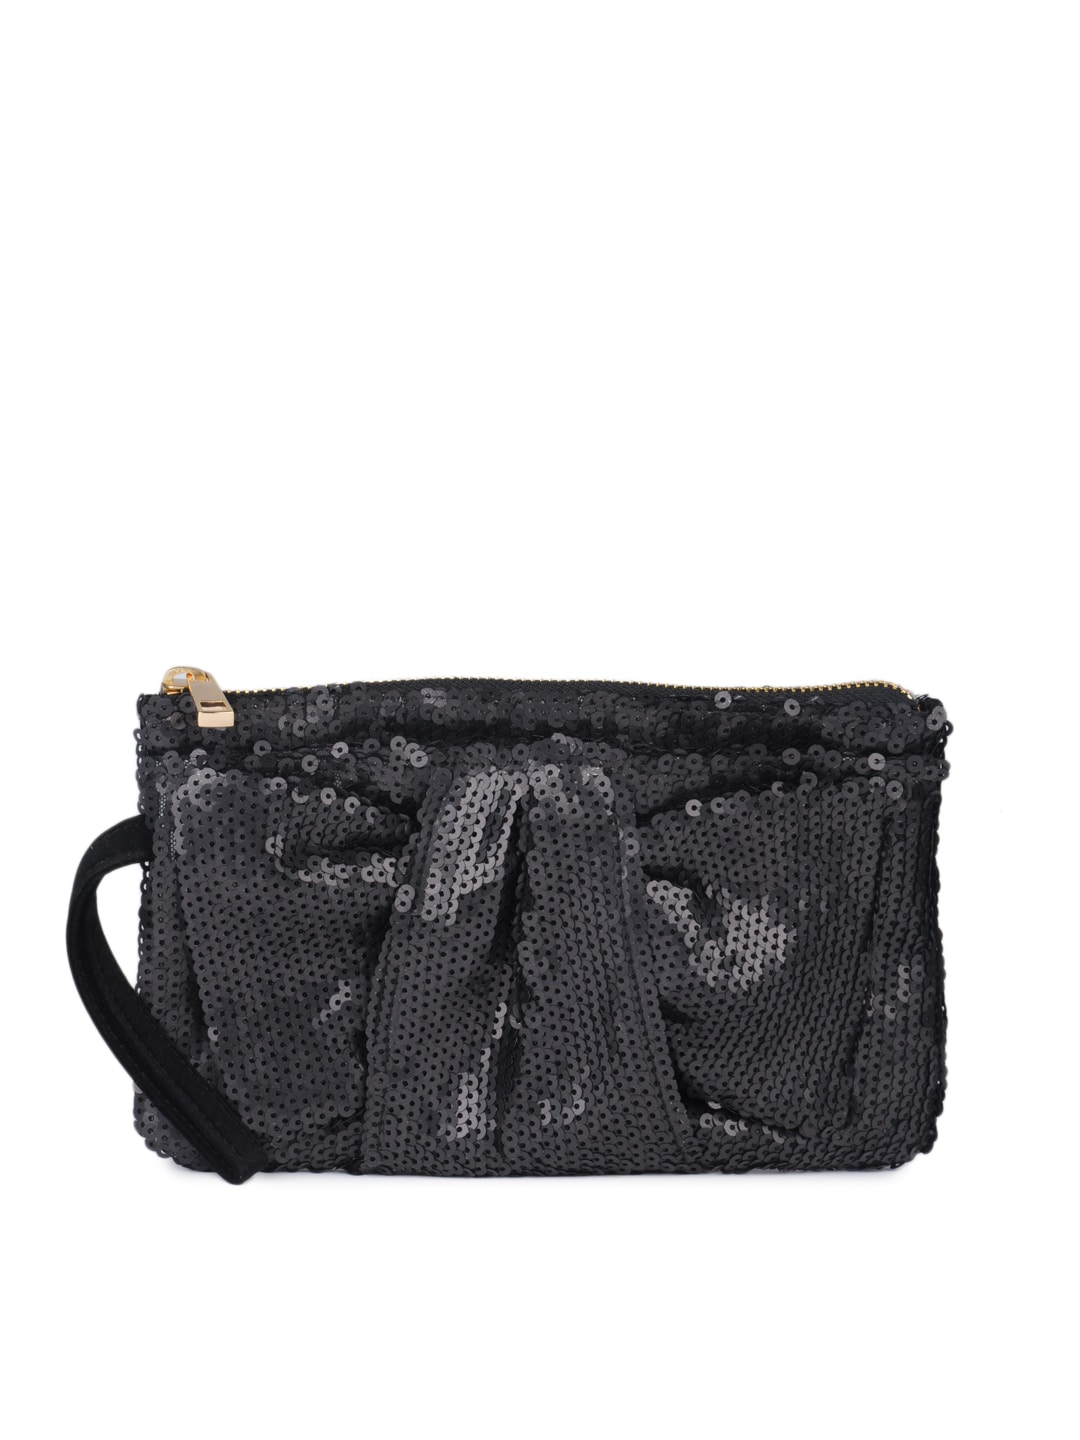 French Connection Women Black Sequin Clutch